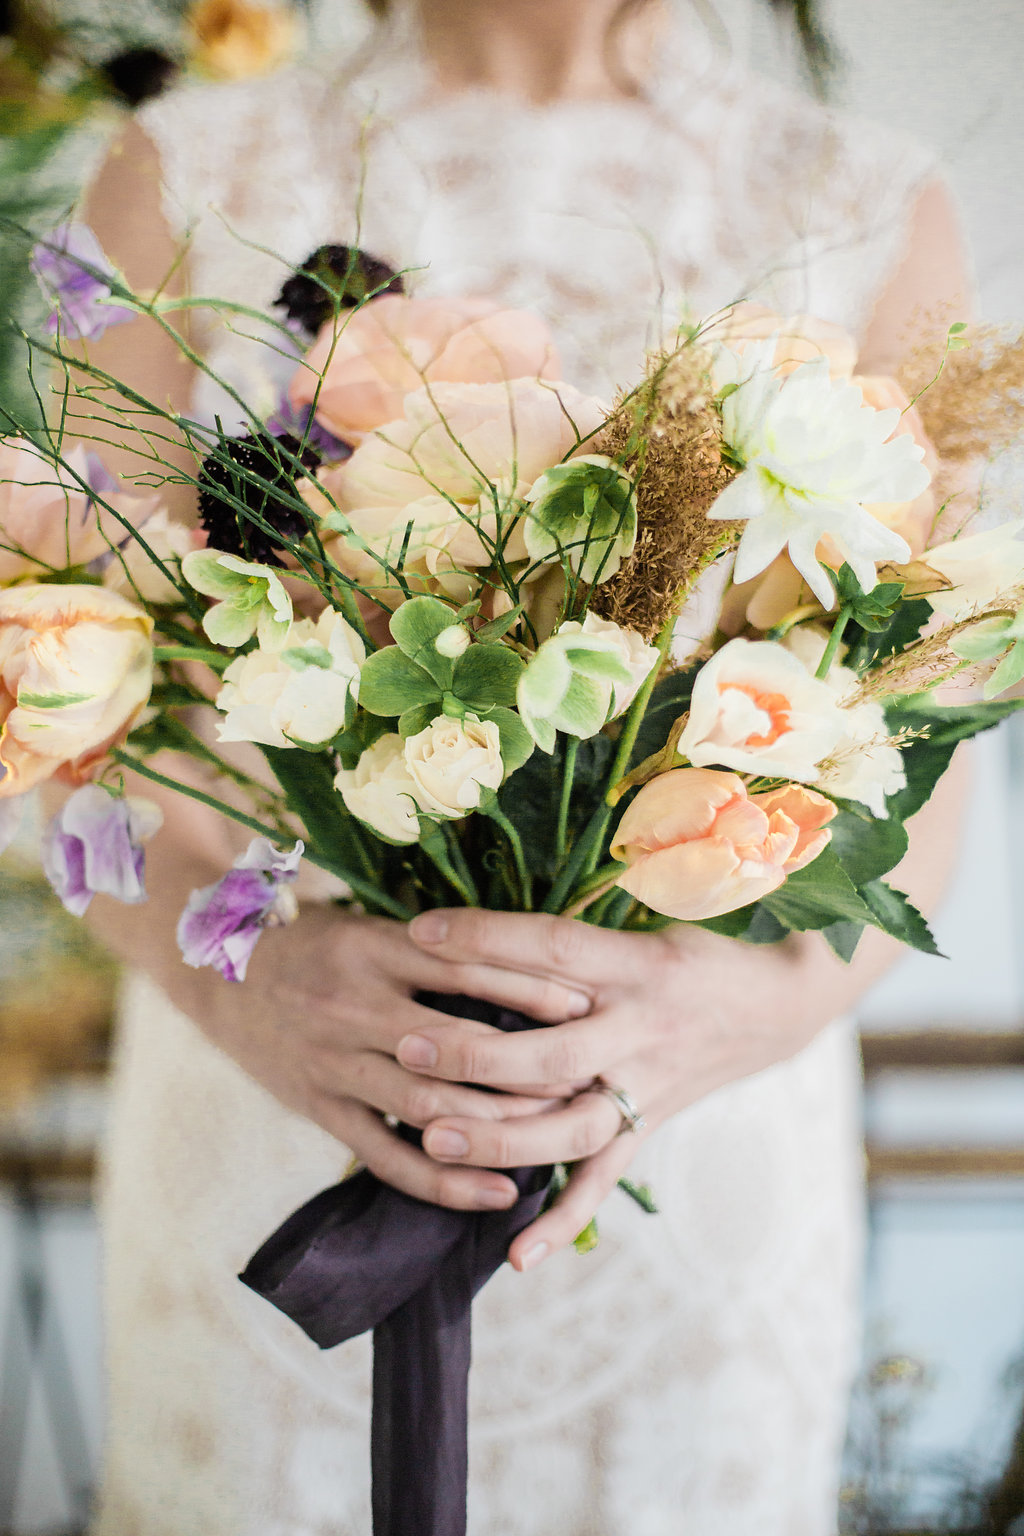 How to Carry a Bridal Bouquet | The Day's Design